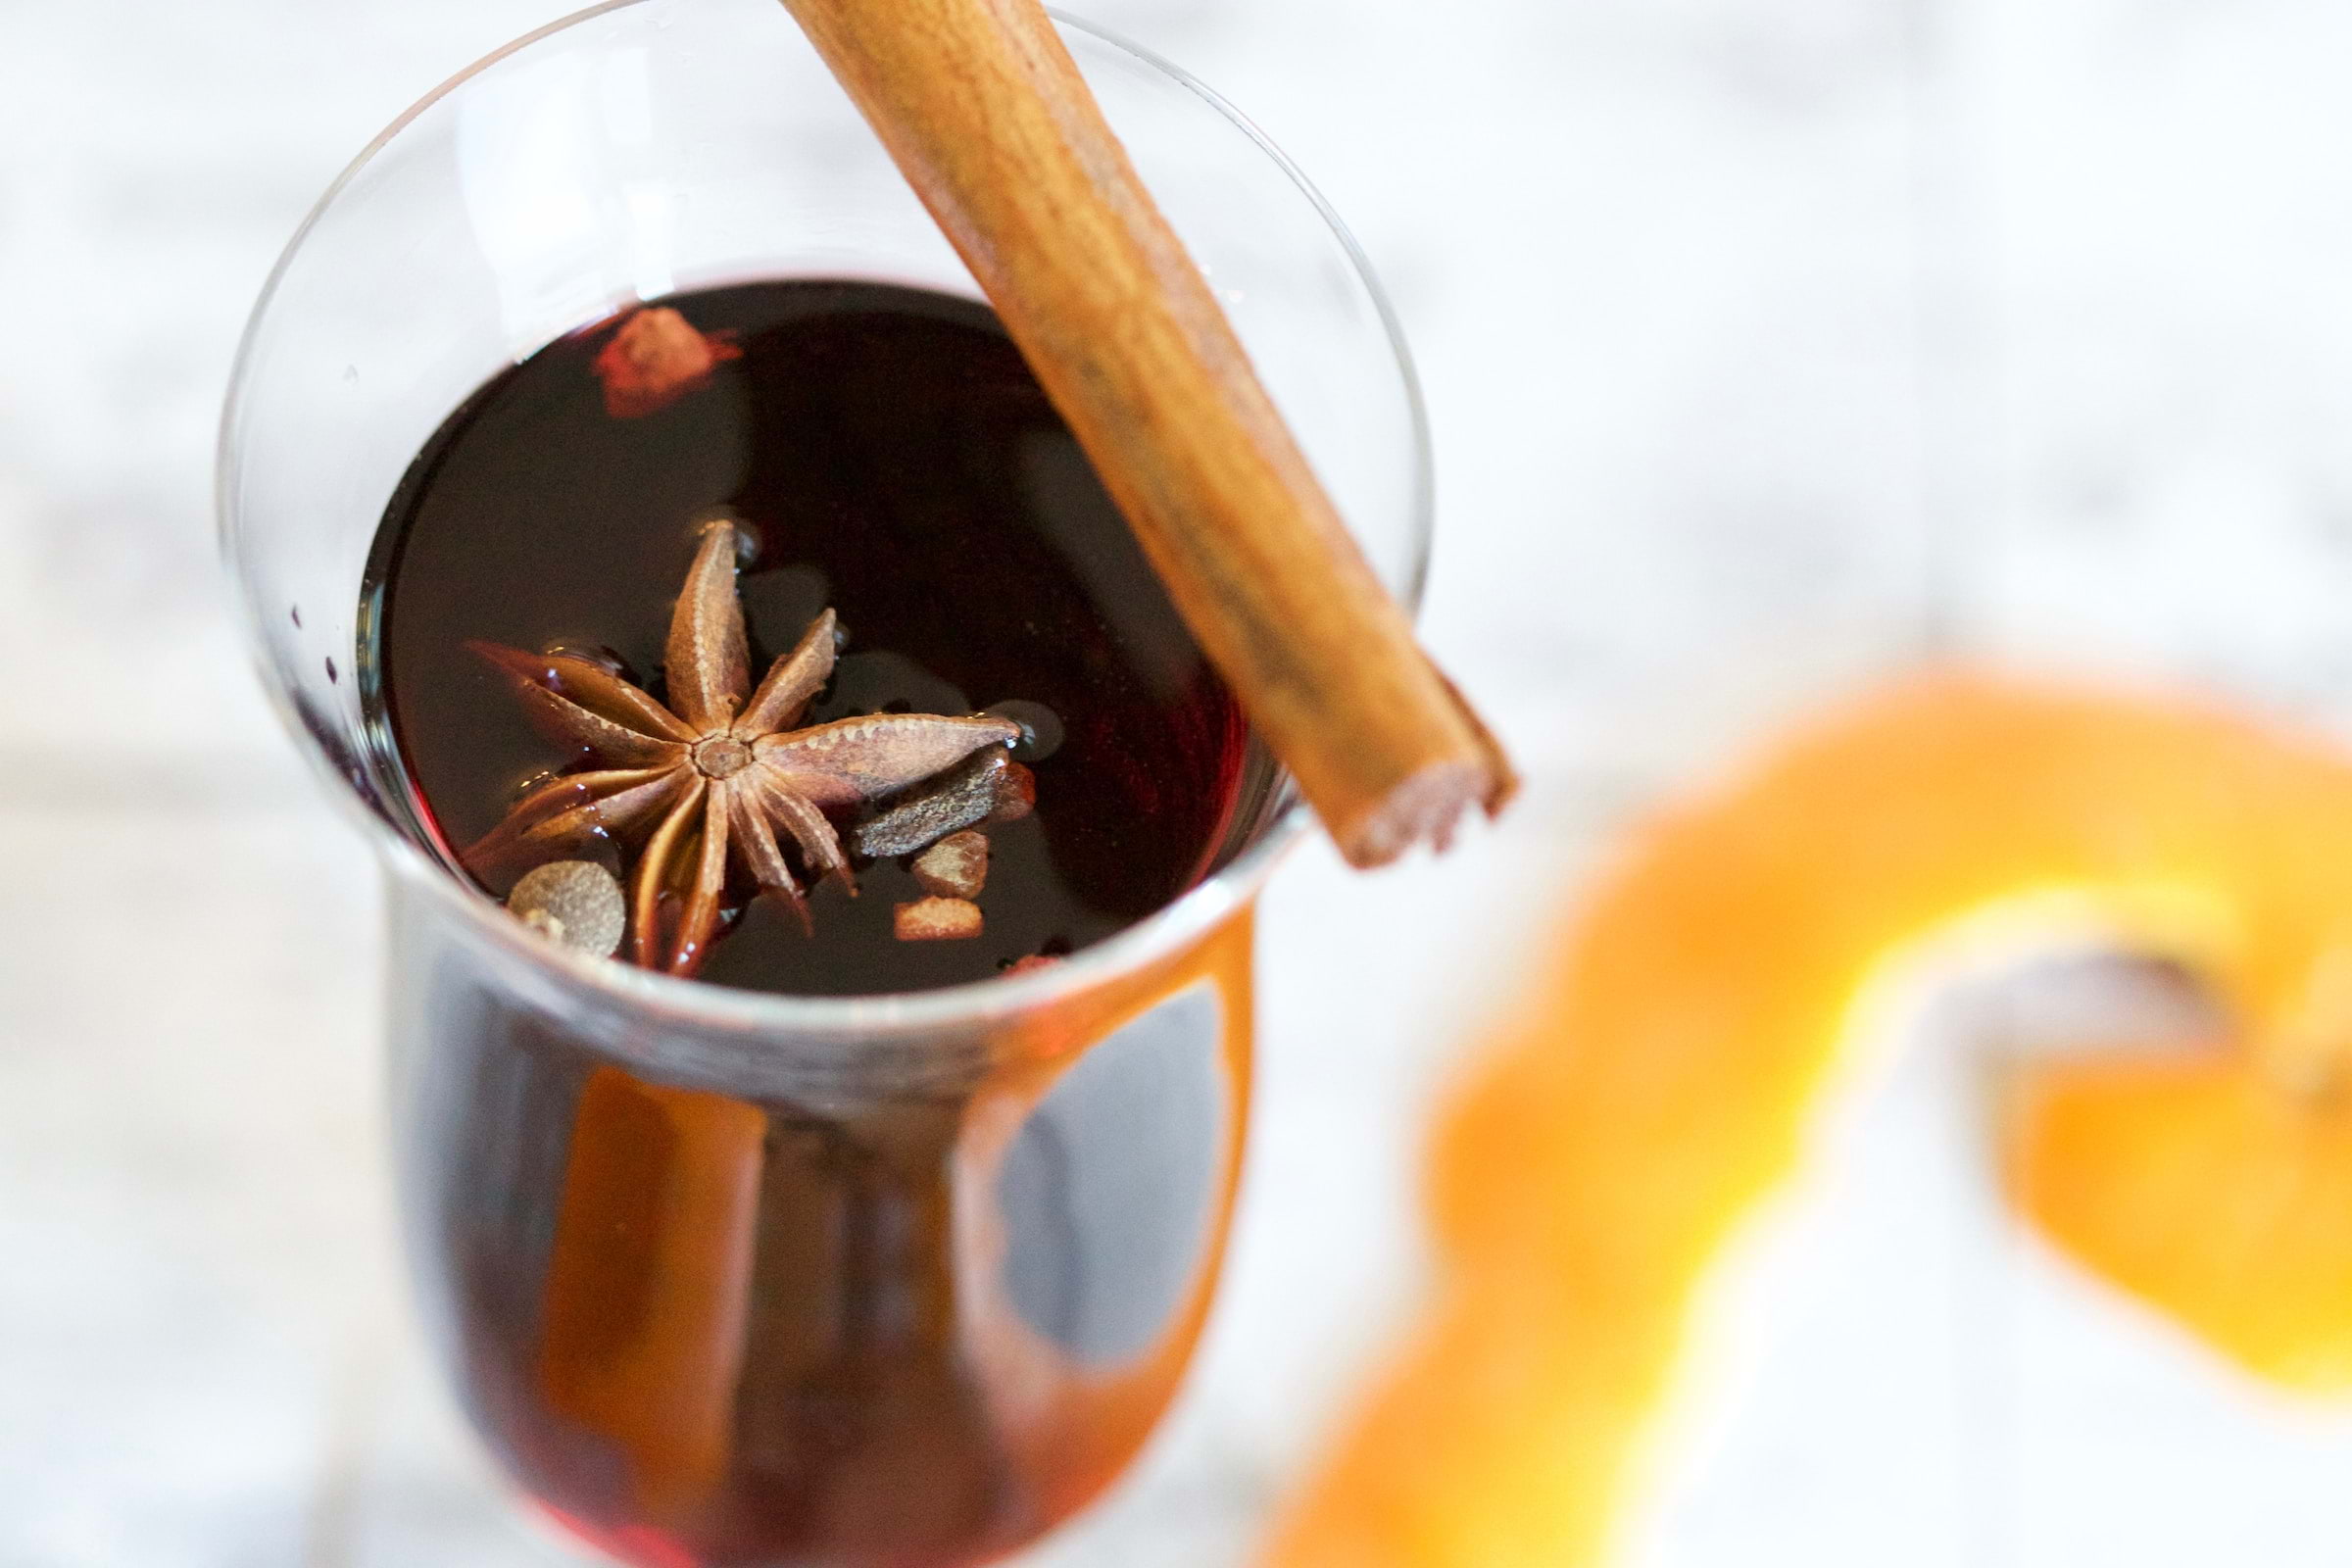 Where to drink mulled wine in London